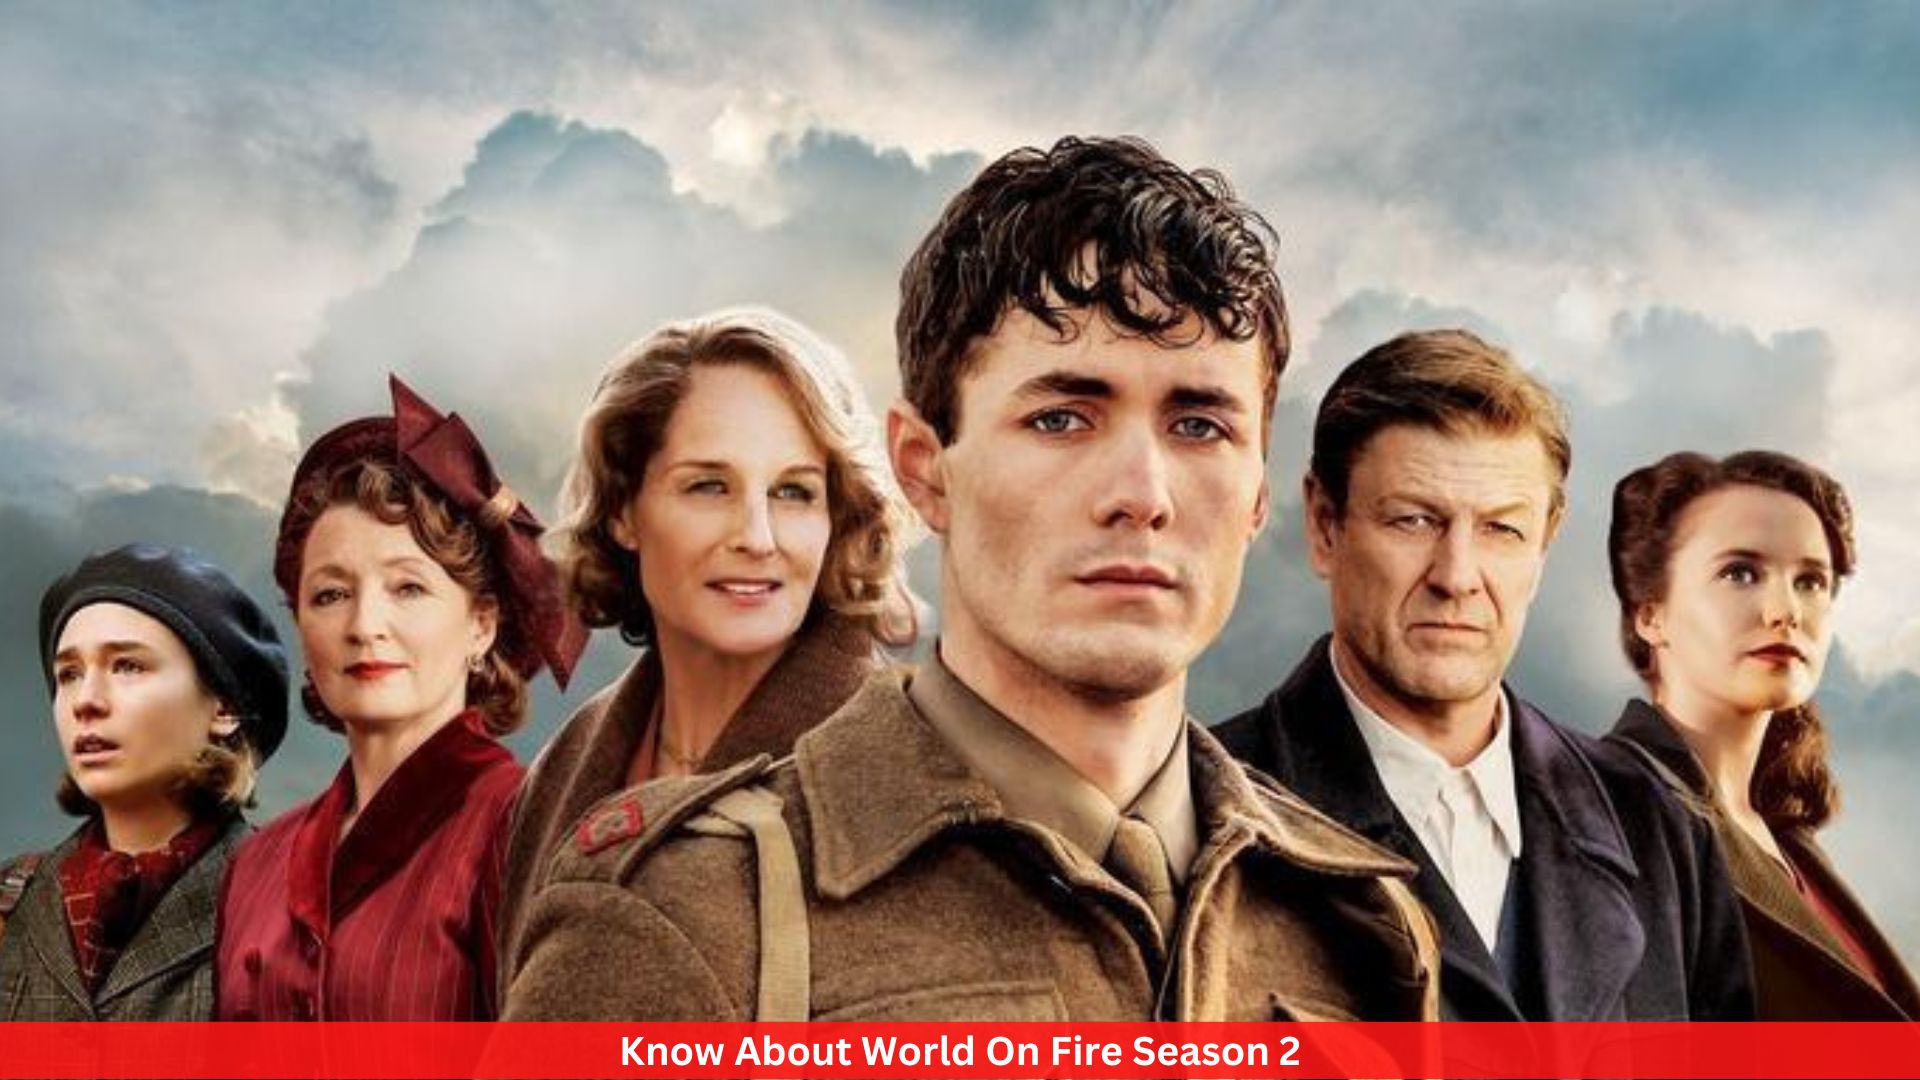 Know About World On Fire Season 2 - Details Inside!